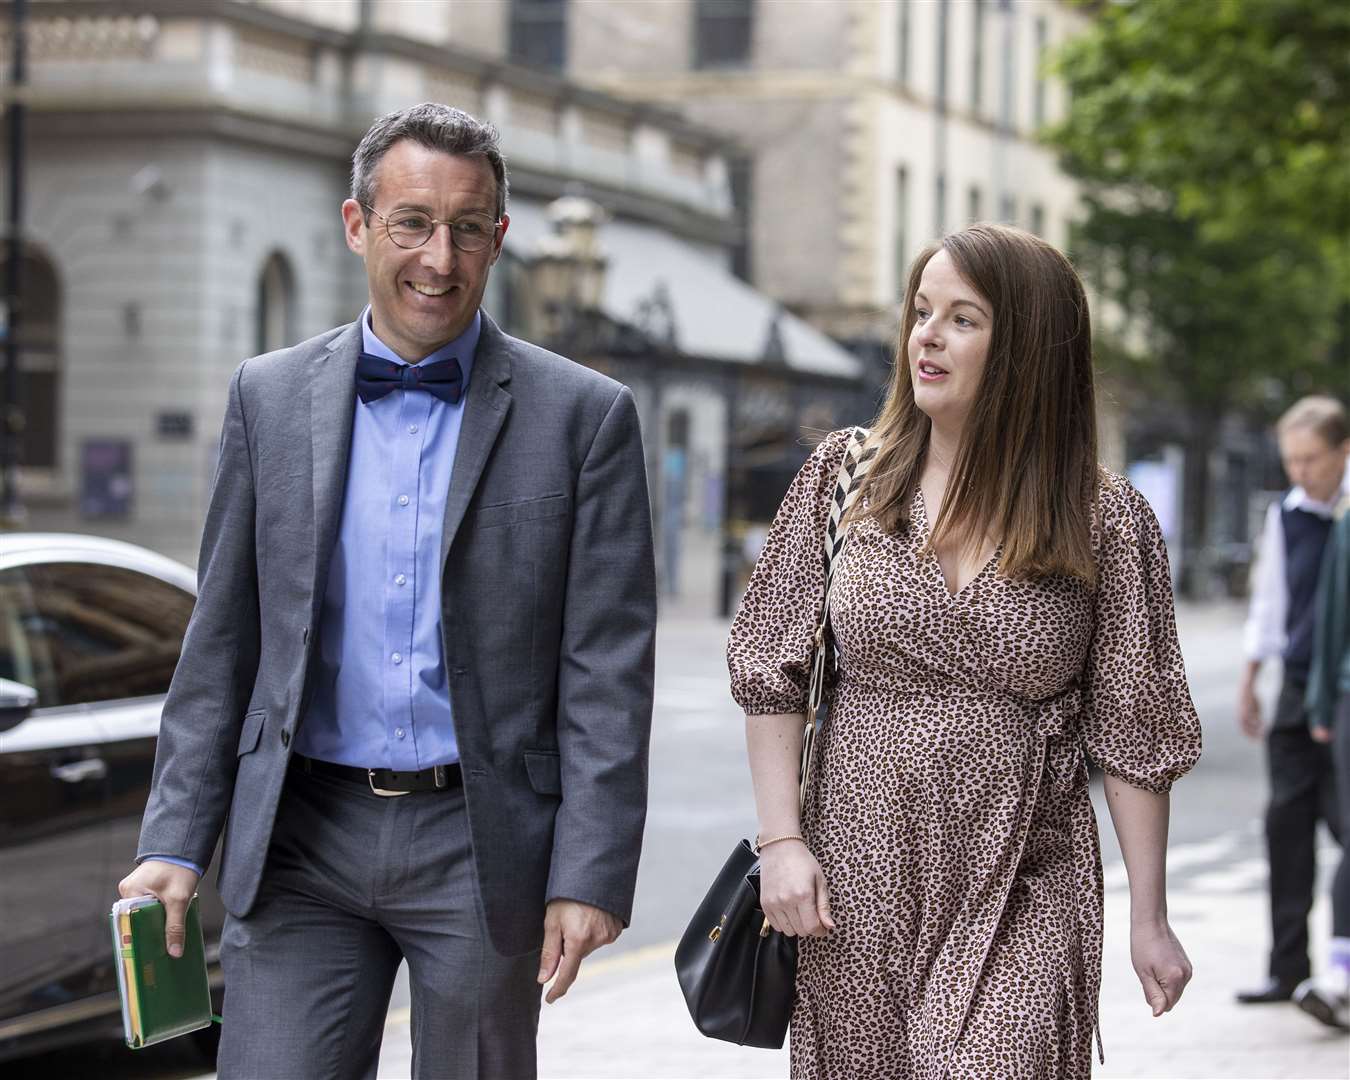 Andrew Muir and Nuala McAllister of the Alliance party arrive for talks (Liam McBurney/PA)